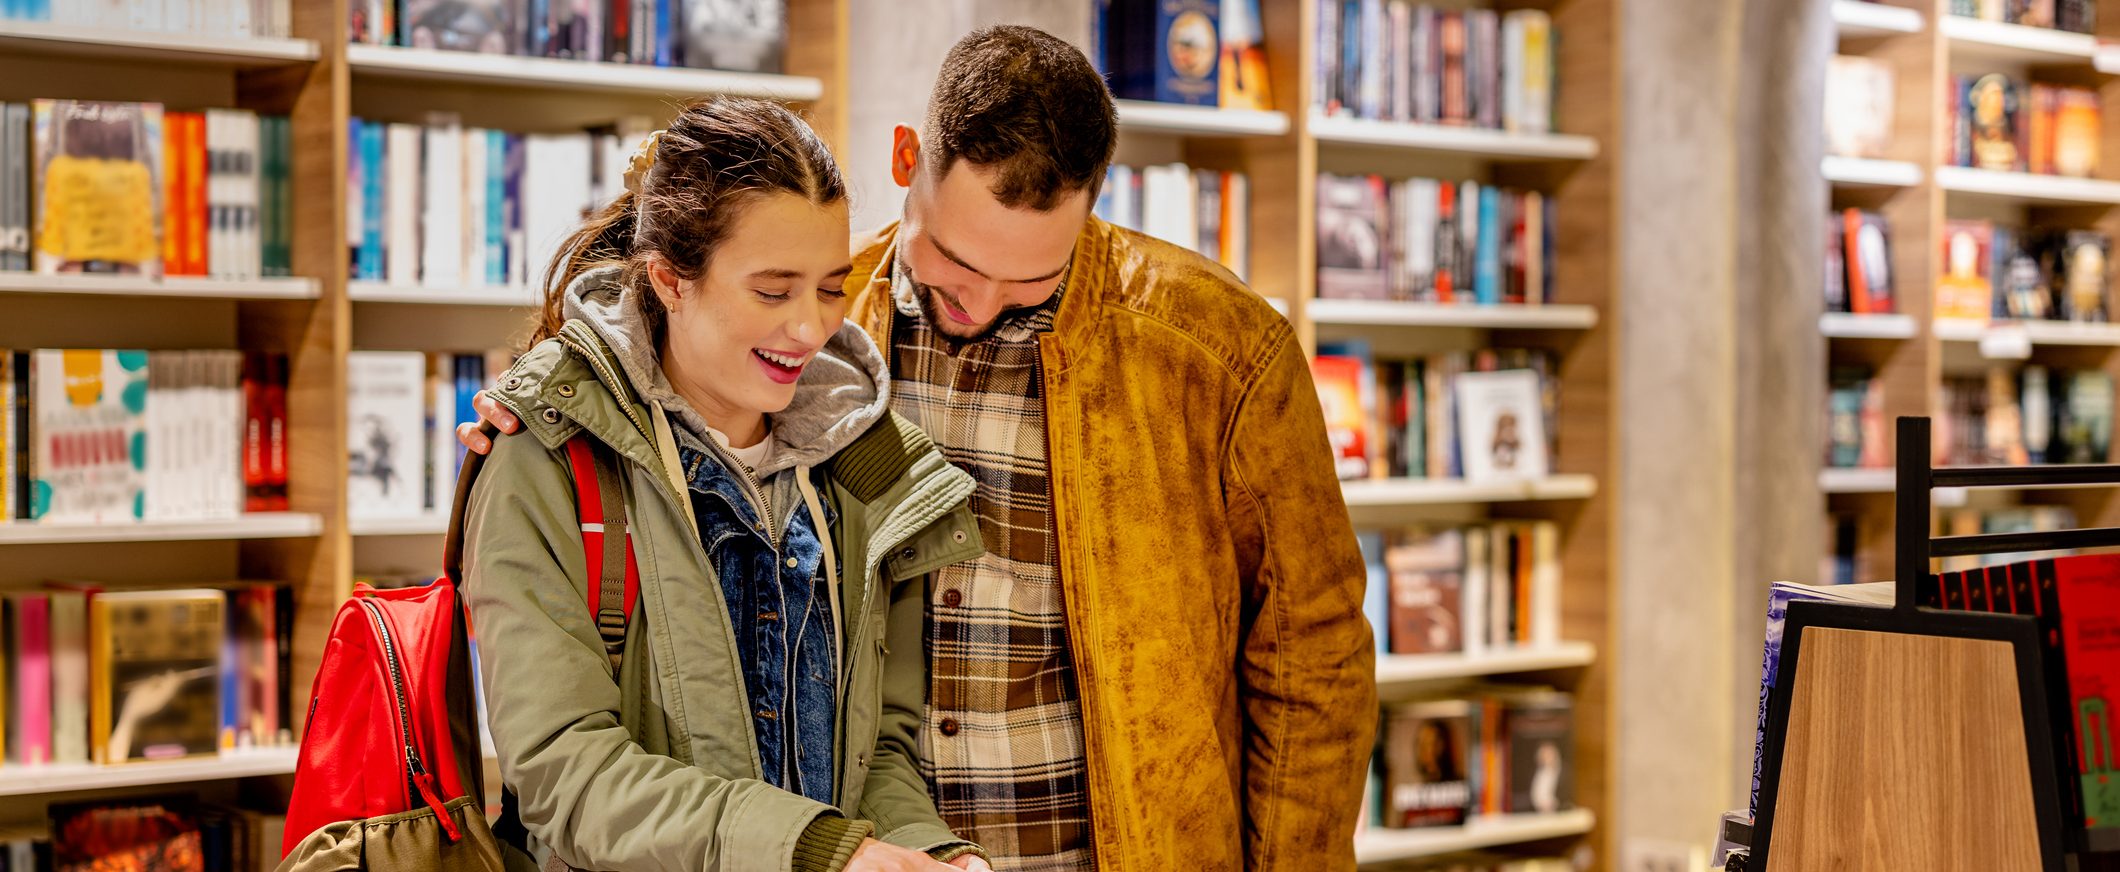 A young couple laughs together in a bookstore.